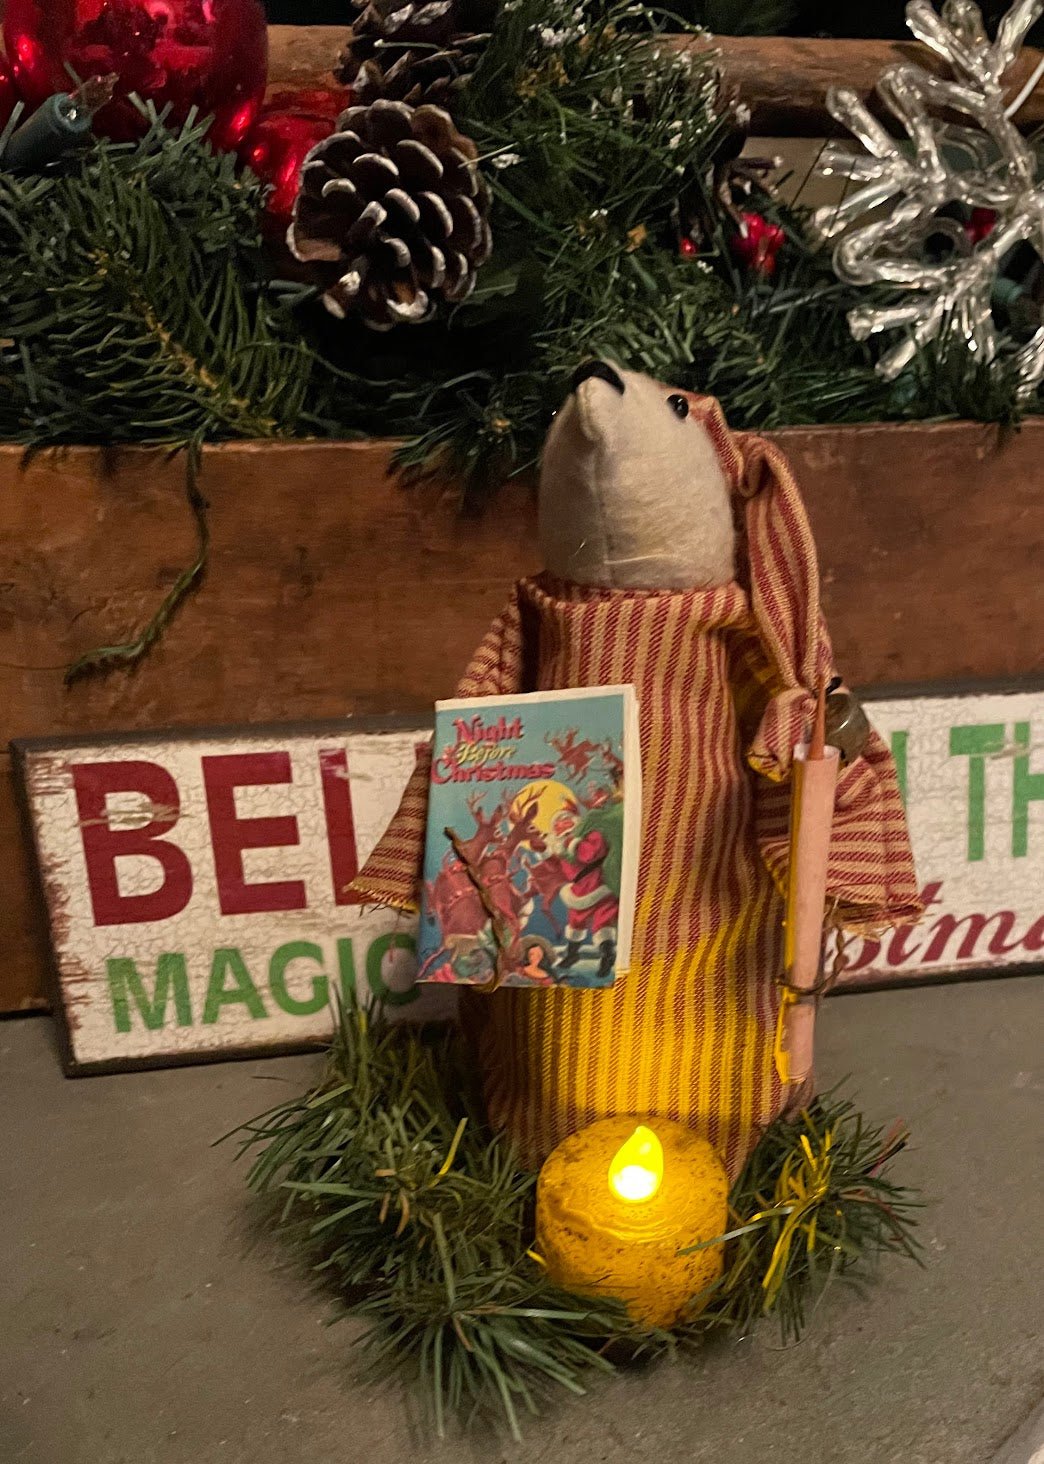 Primitive Handmade Night Before Christmas Mouse with Prim Tealight Candle - The Primitive Pineapple Collection